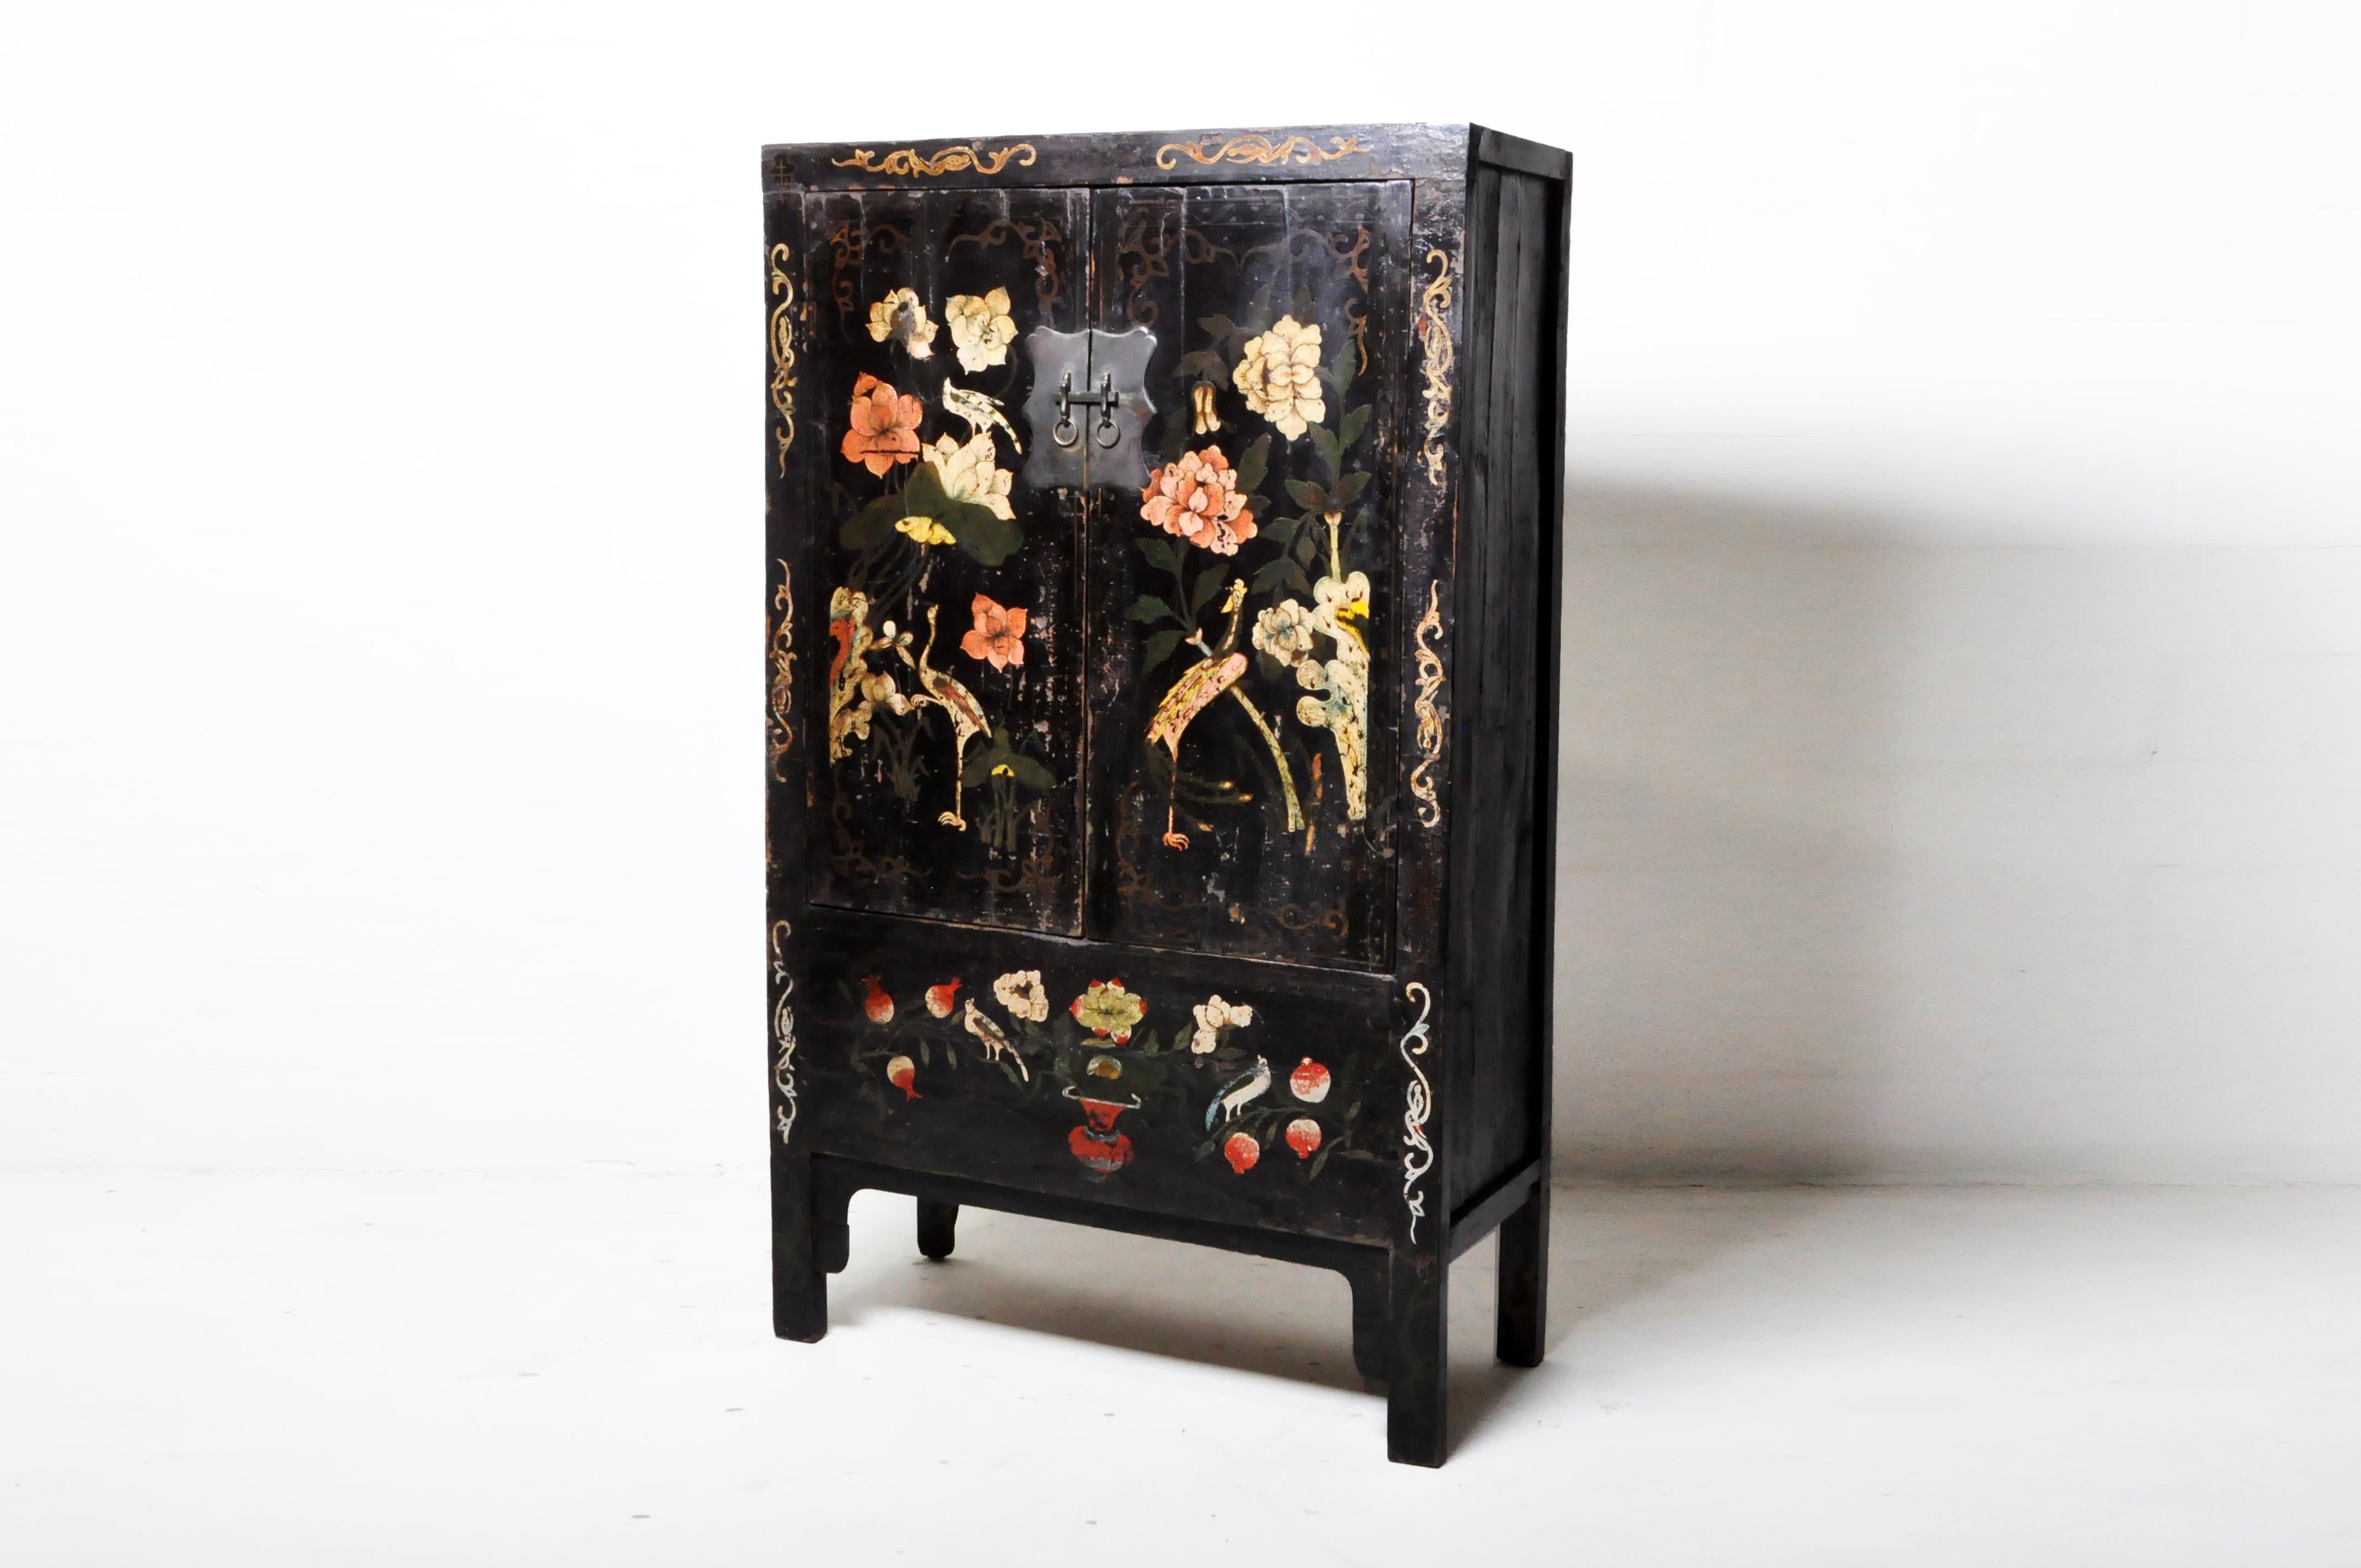 This Chinese cabinet was made in China and was made from elmwood with traditional nail-less joinery, c. 20th Century. The piece features two doors, two shelves, and floral and bird artwork. Wear consistent with age and use.
 